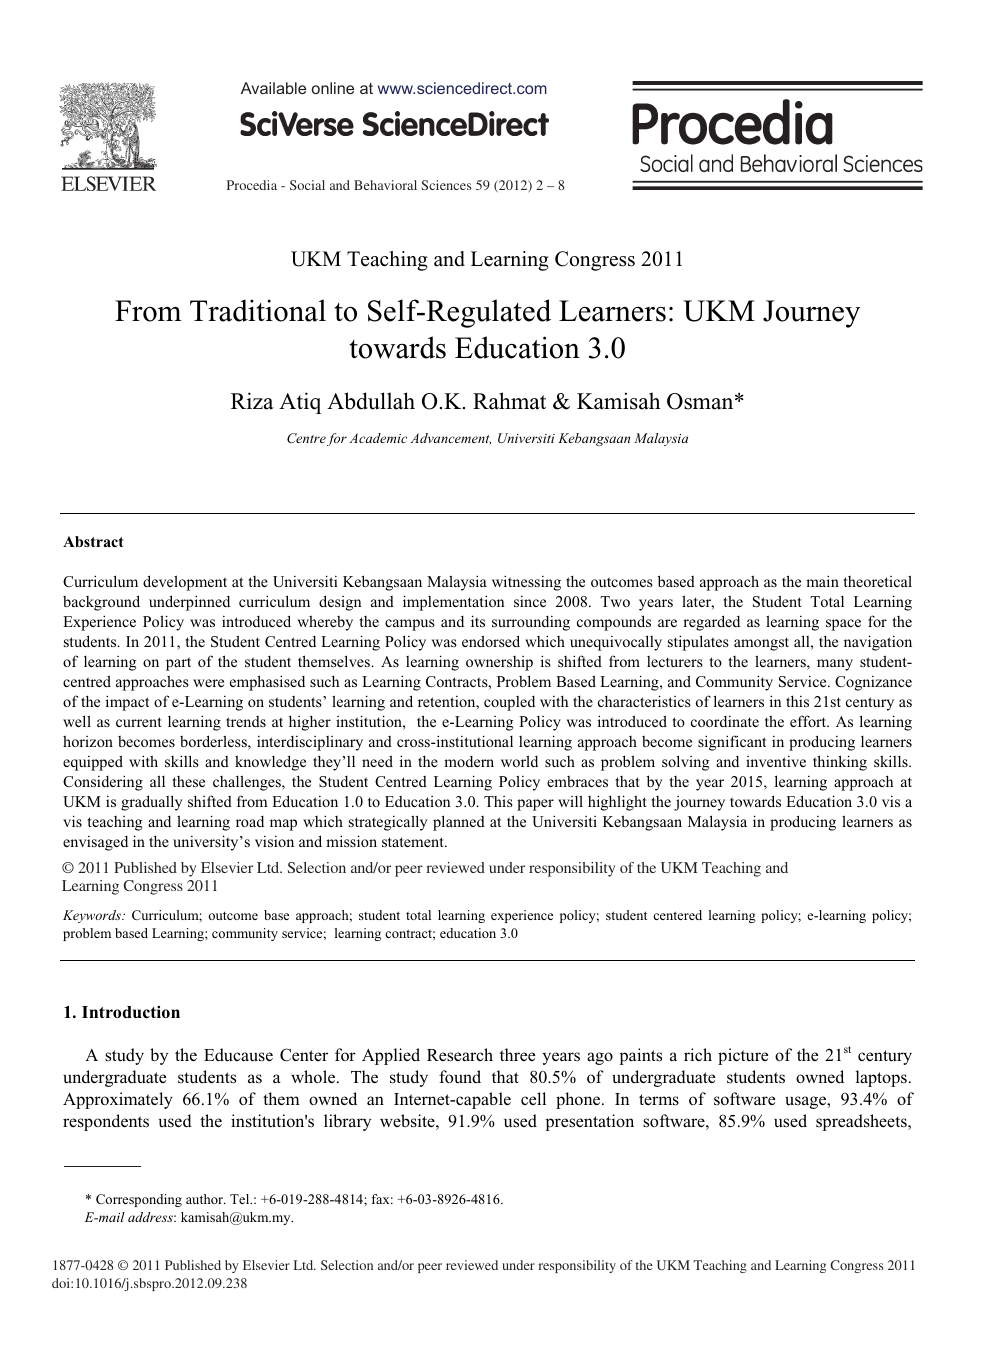 From Traditional To Self Regulated Learners Ukm Journey Towards Education 3 0 Topic Of Research Paper In Educational Sciences Download Scholarly Article Pdf And Read For Free On Cyberleninka Open Science Hub